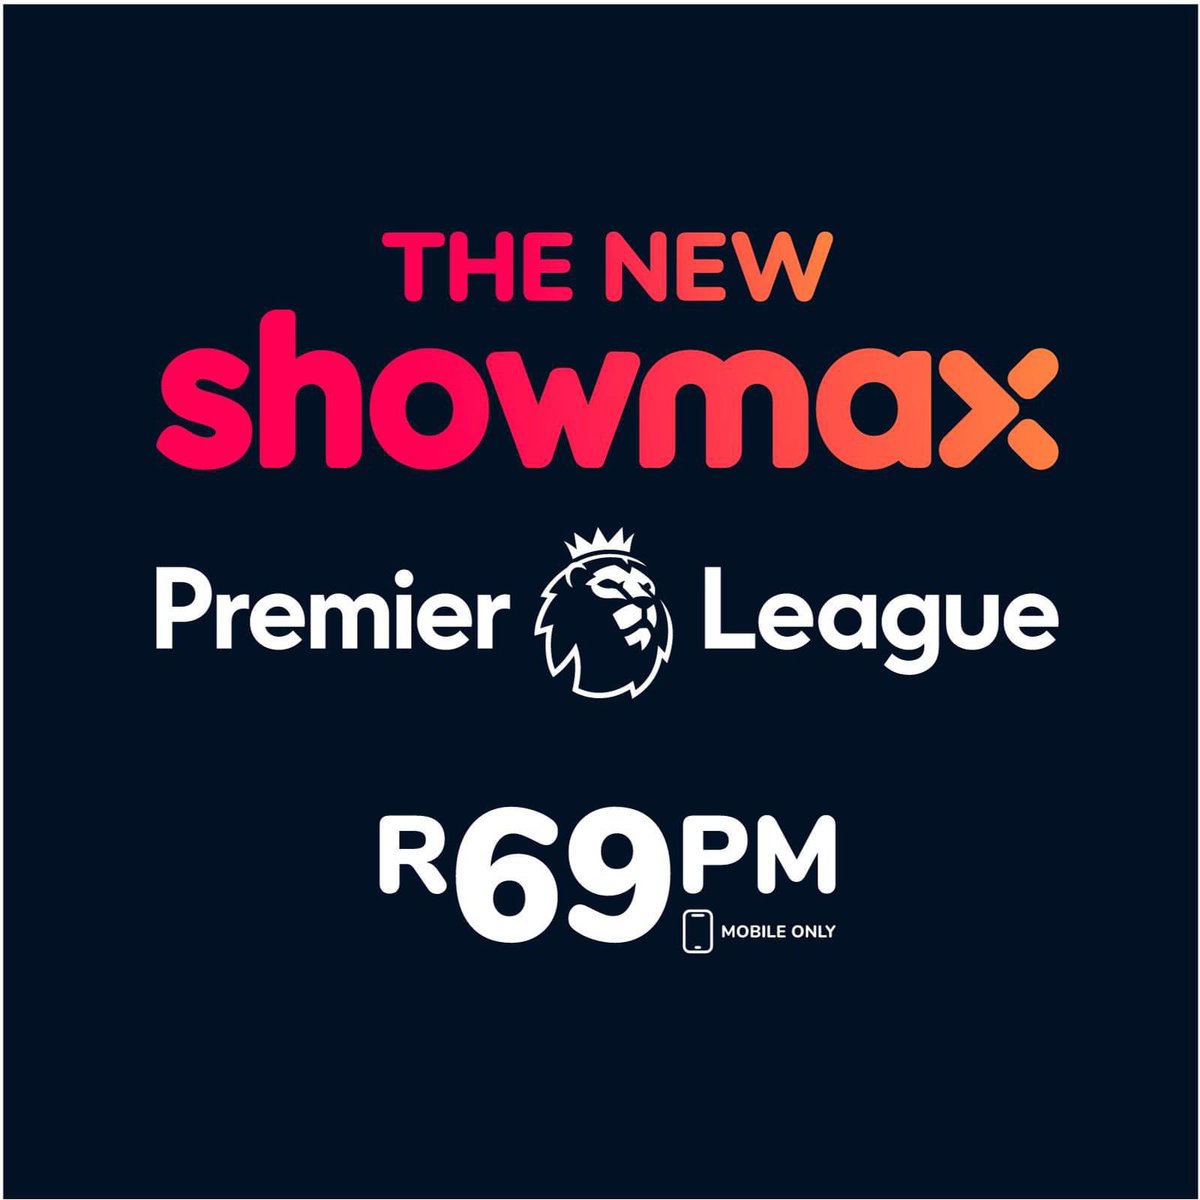 Getting to watch tonight's game conveniently on the go on Showmax is exactly what we all need. Get it for just R69 per month #ShowmaxPL #Showmaxonthemove